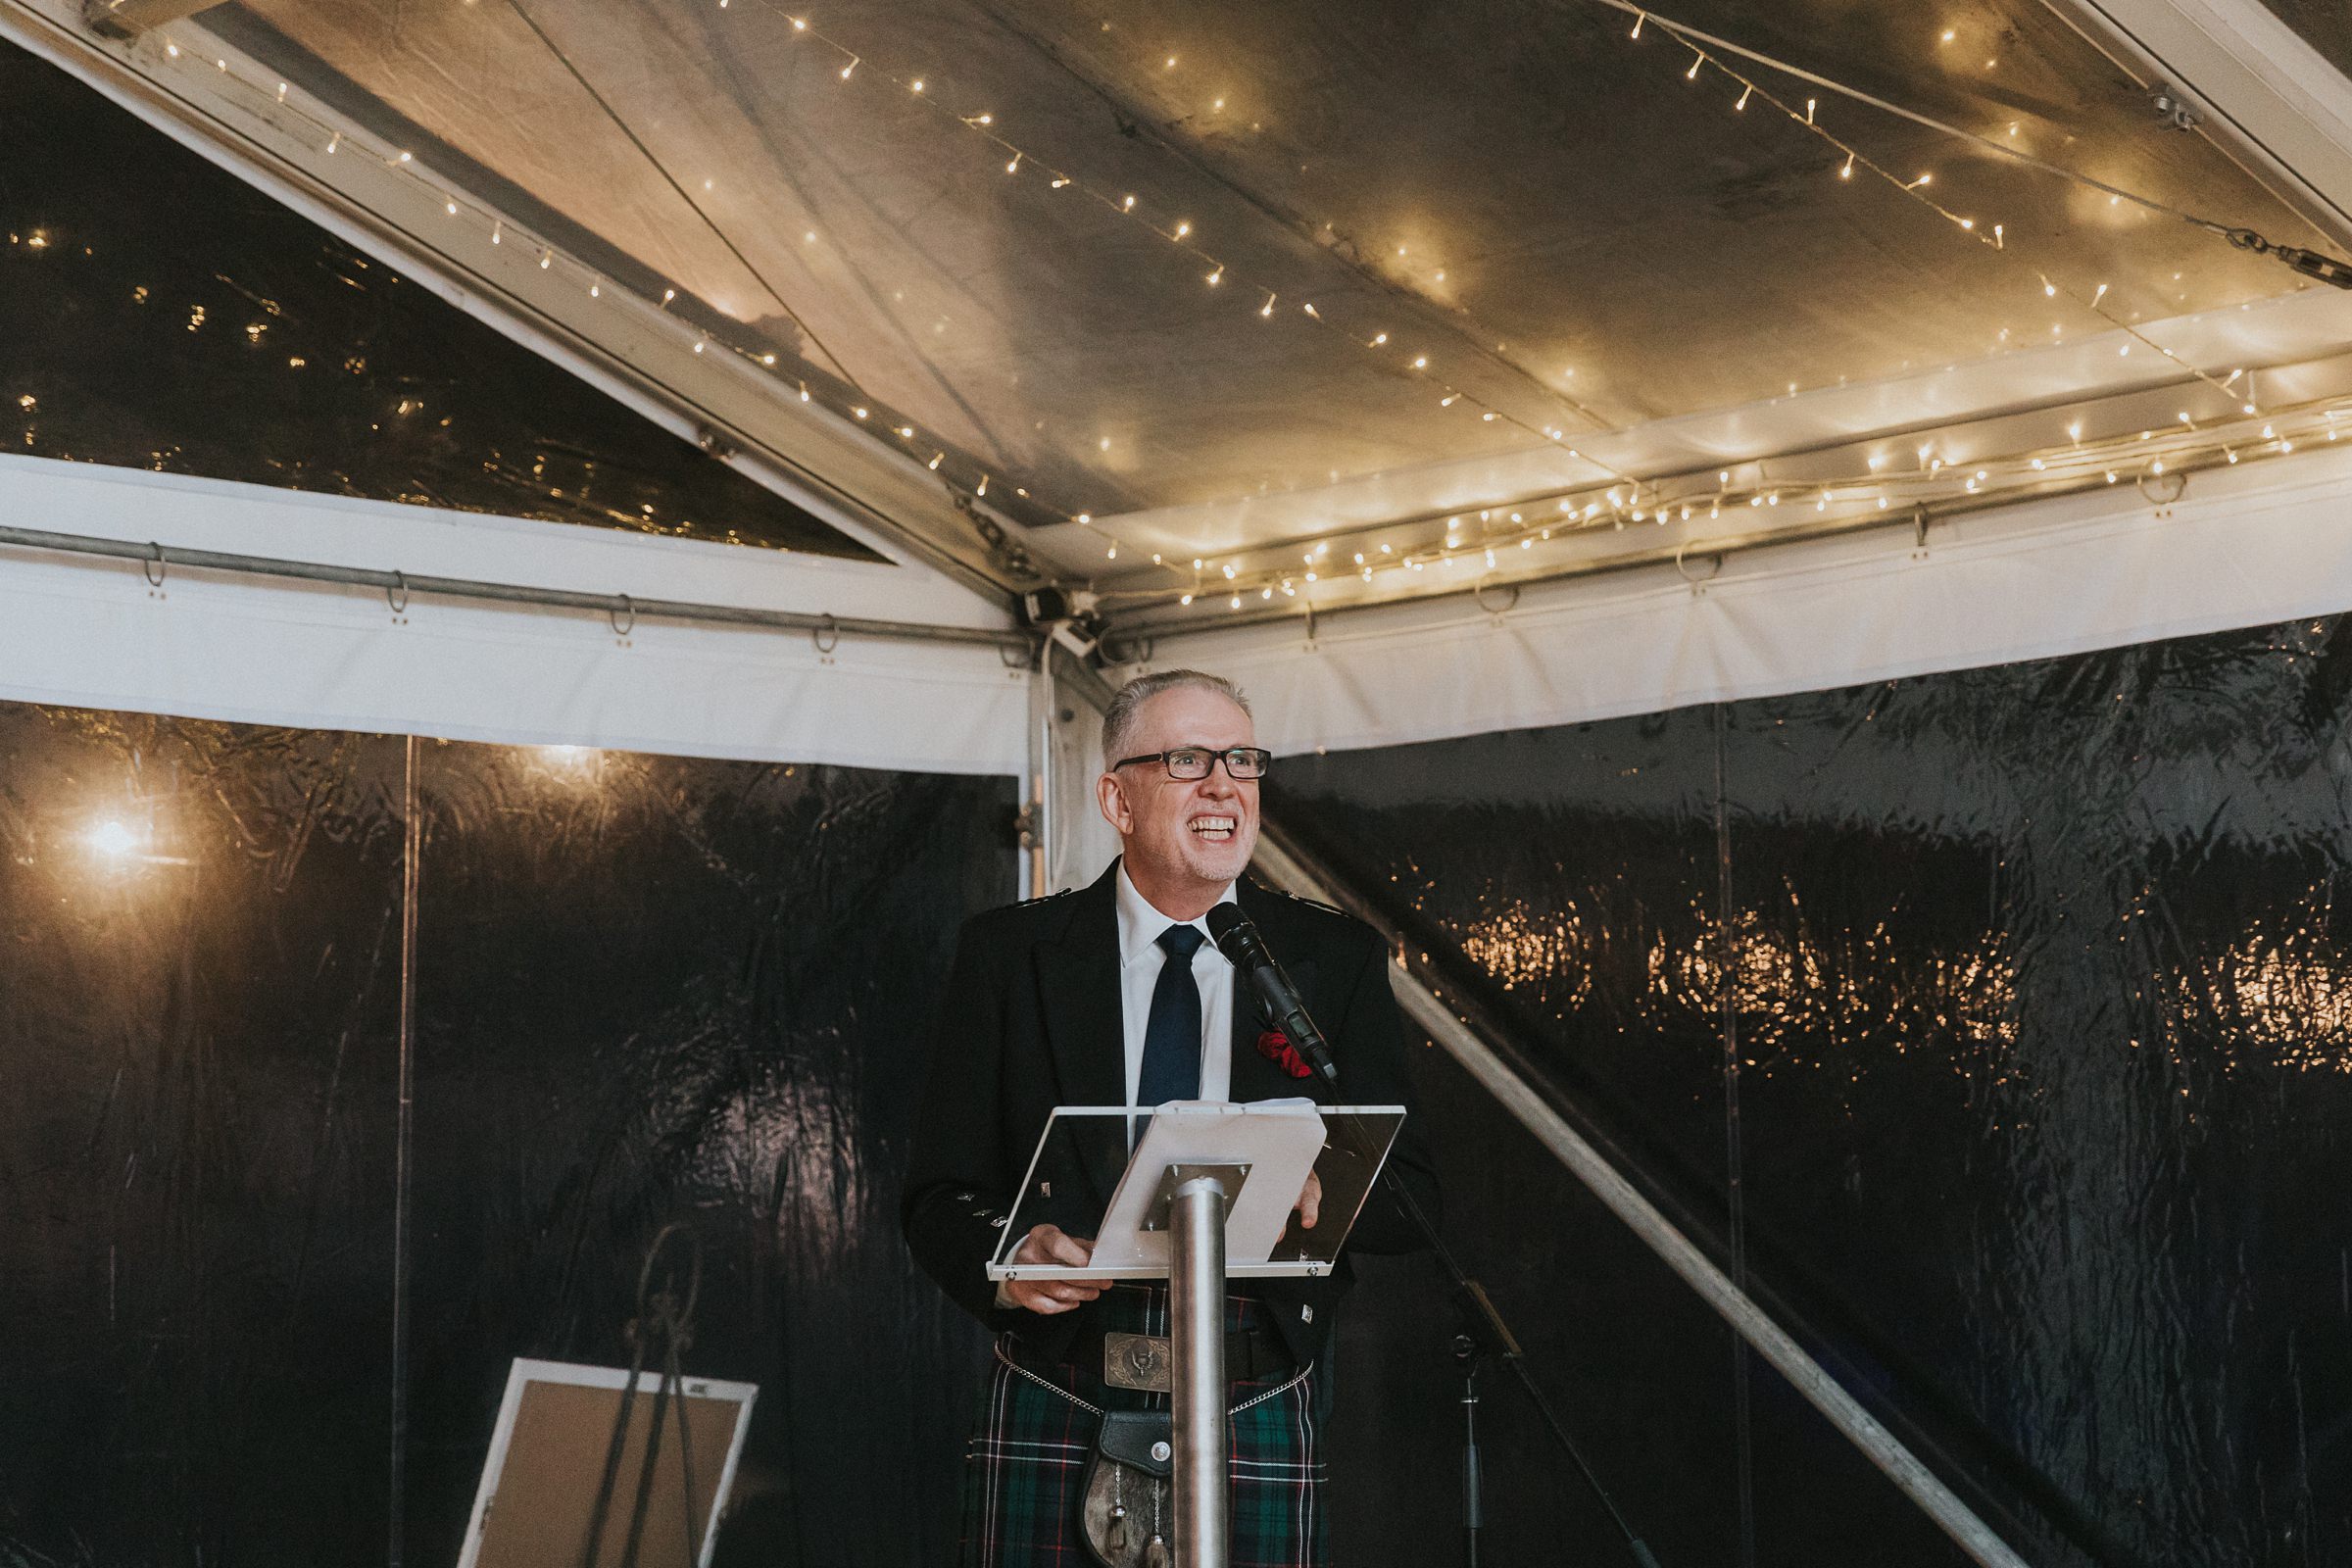 father of the bride beaming with pride during speech in marquee